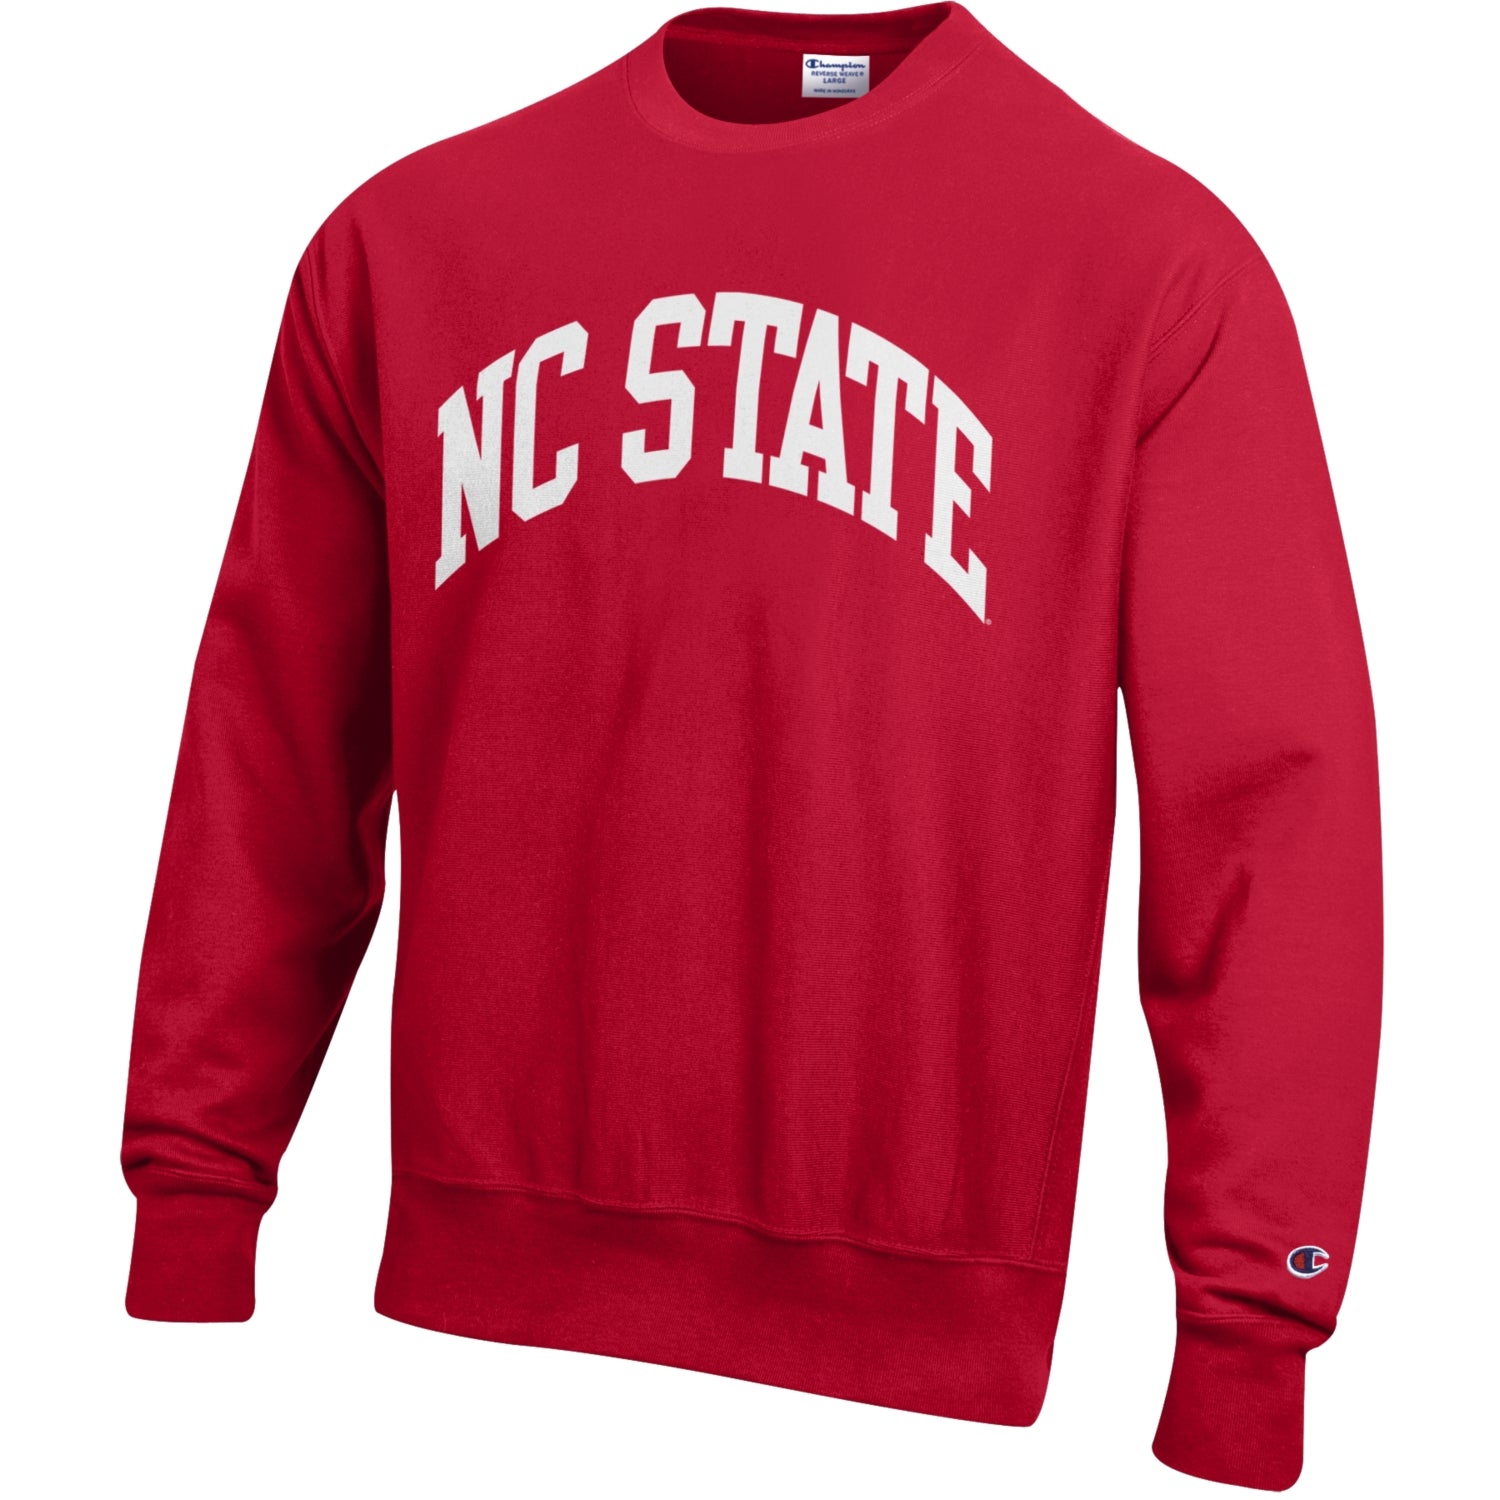 NC State Wolfpack Champion Red Reverse Weave Arch Crewneck Sweatshirt